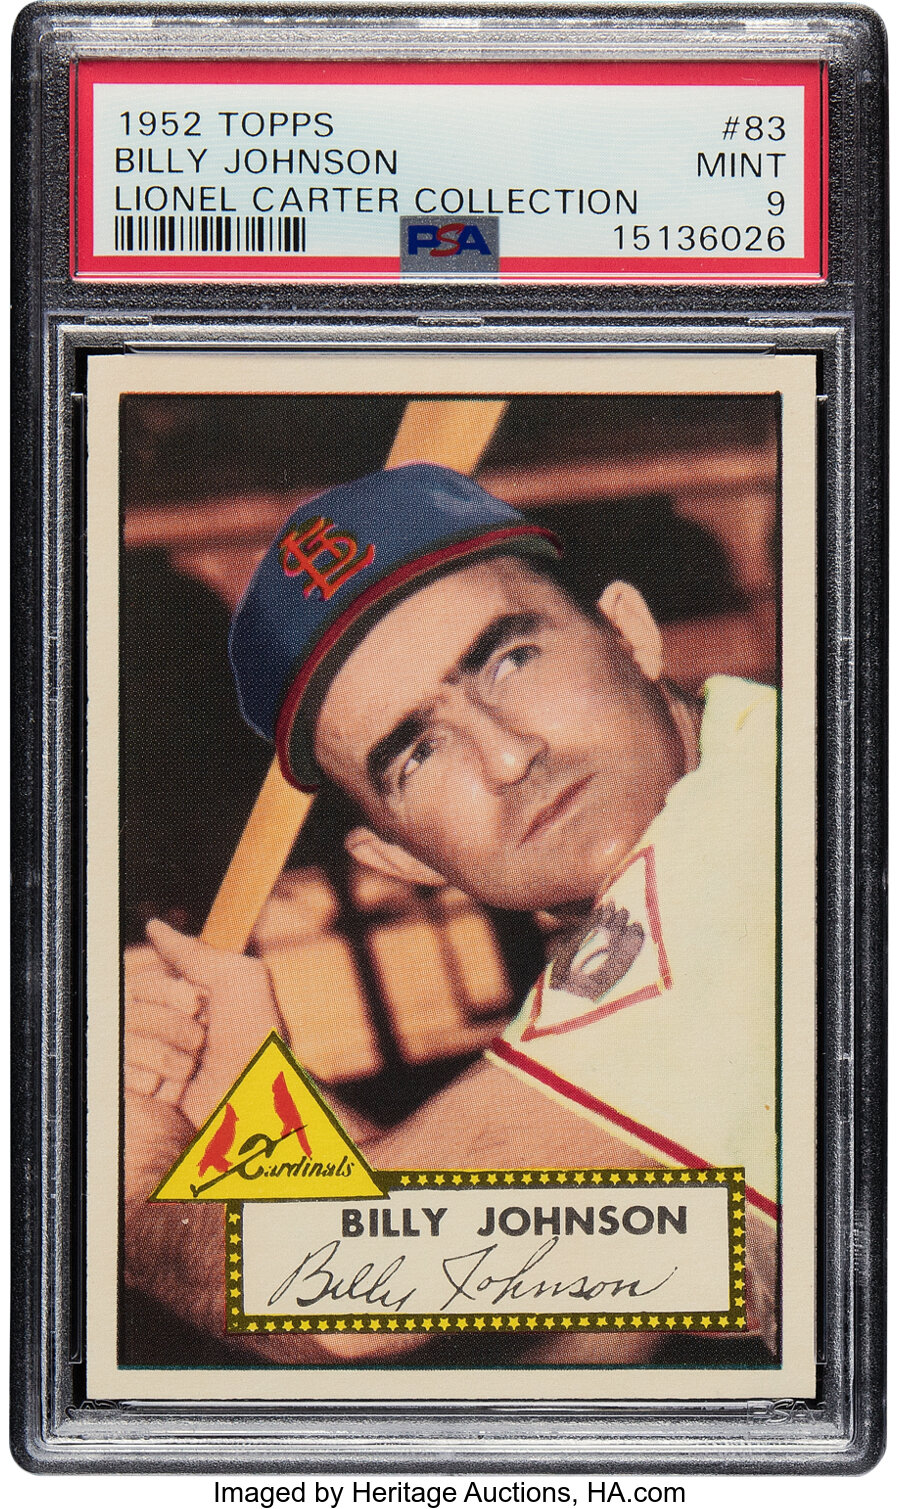 1952 Topps Billy Johnson #83 PSA Mint 9 - Pop One, None Superior! From the Lionel Carter Collection